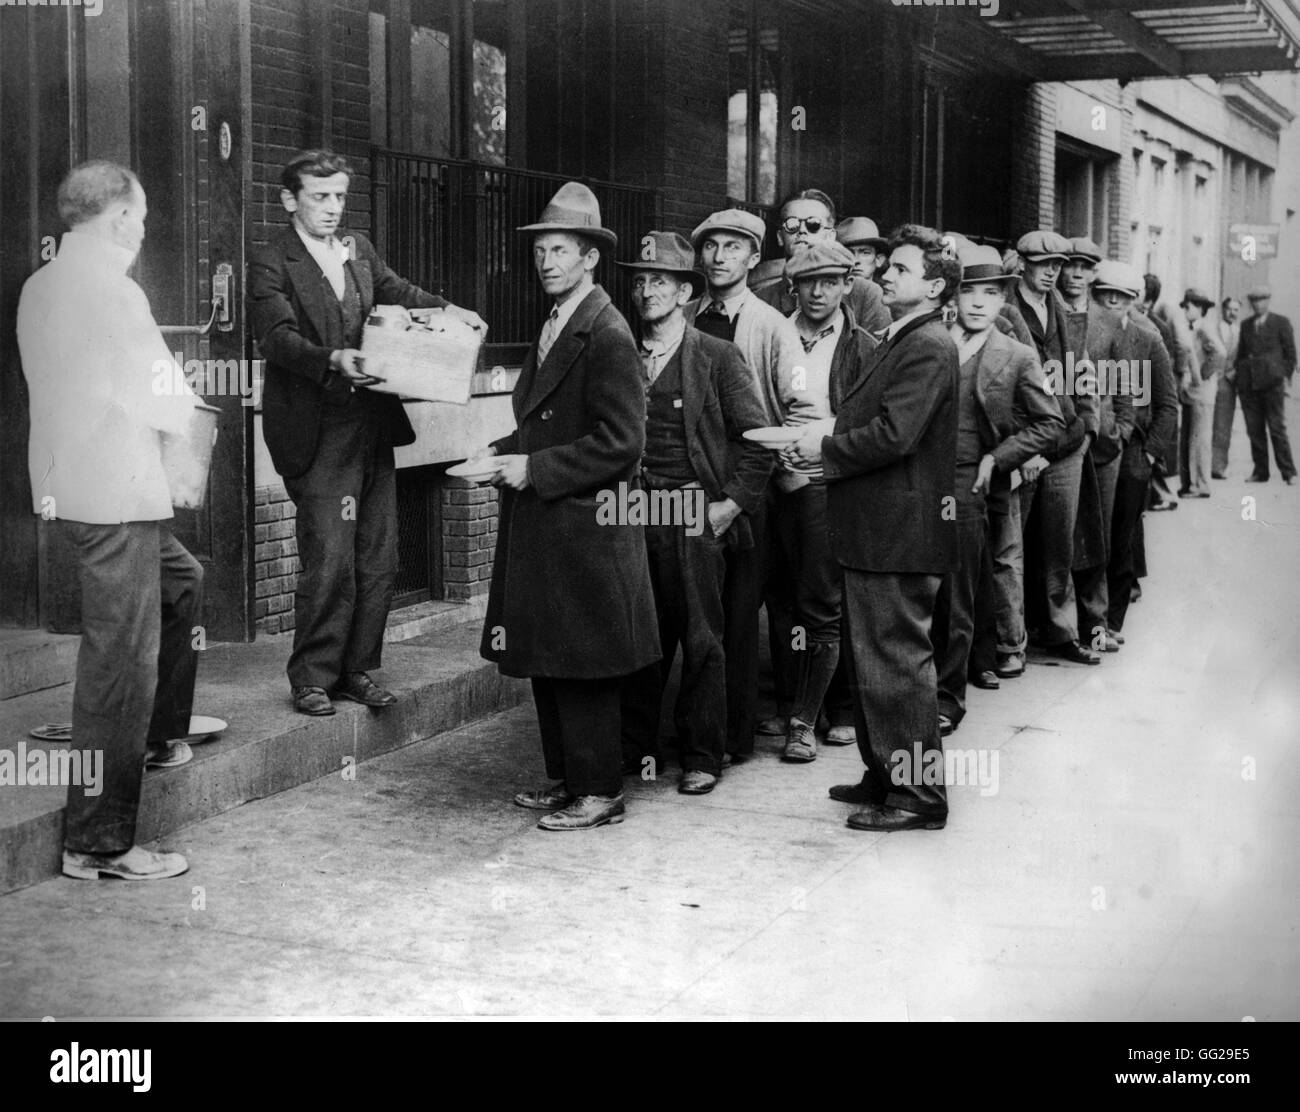 Soup Line Depression High Resolution Stock Photography And Images Alamy